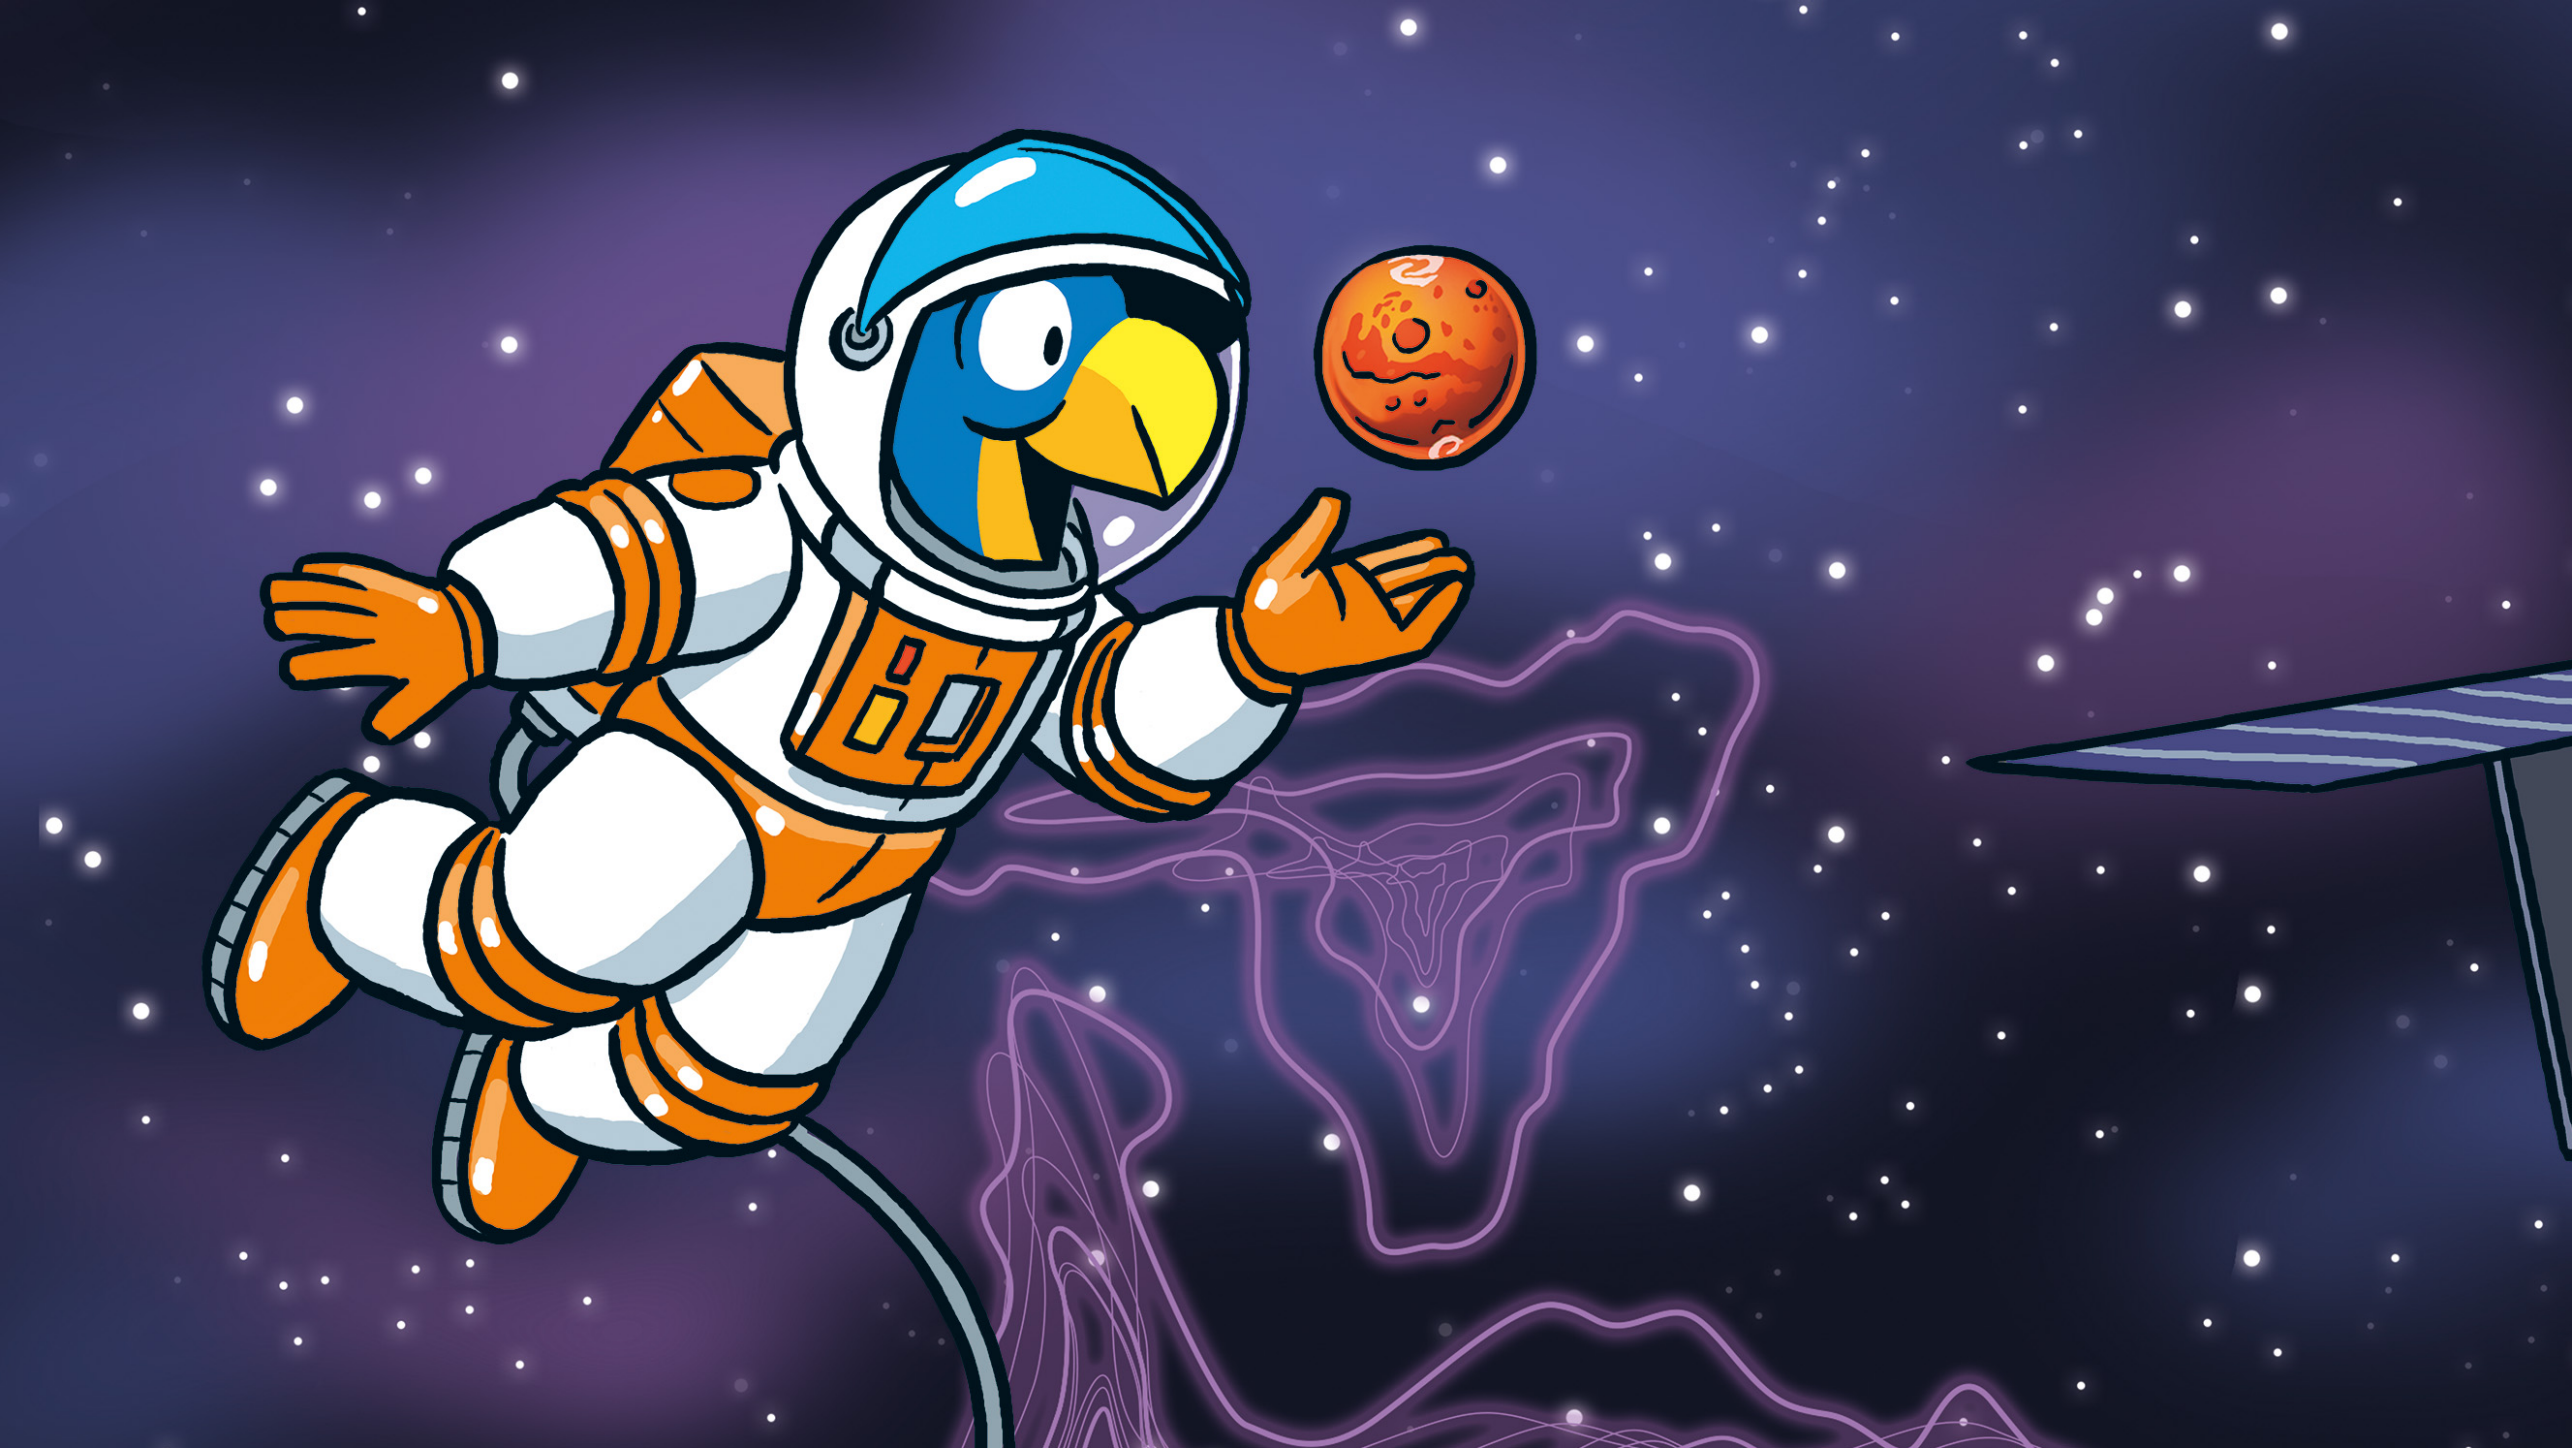 Illustration of Globi as an astronaut in space